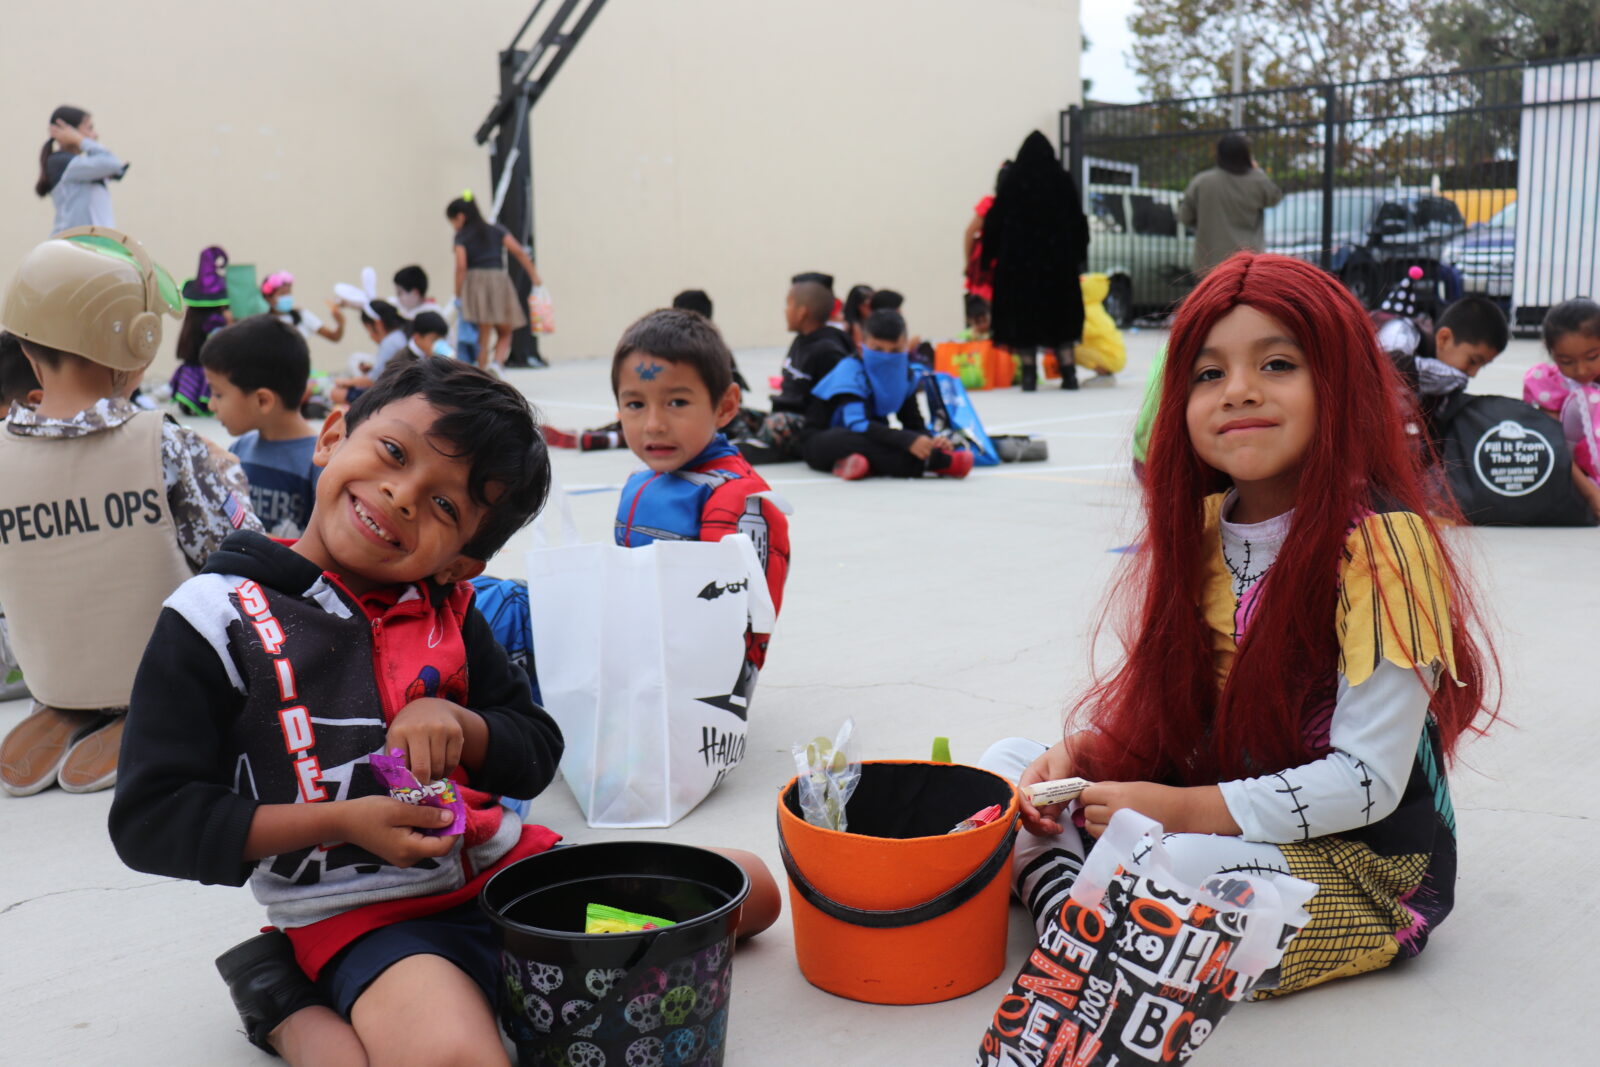 6th Annual Trunk-or-Treat